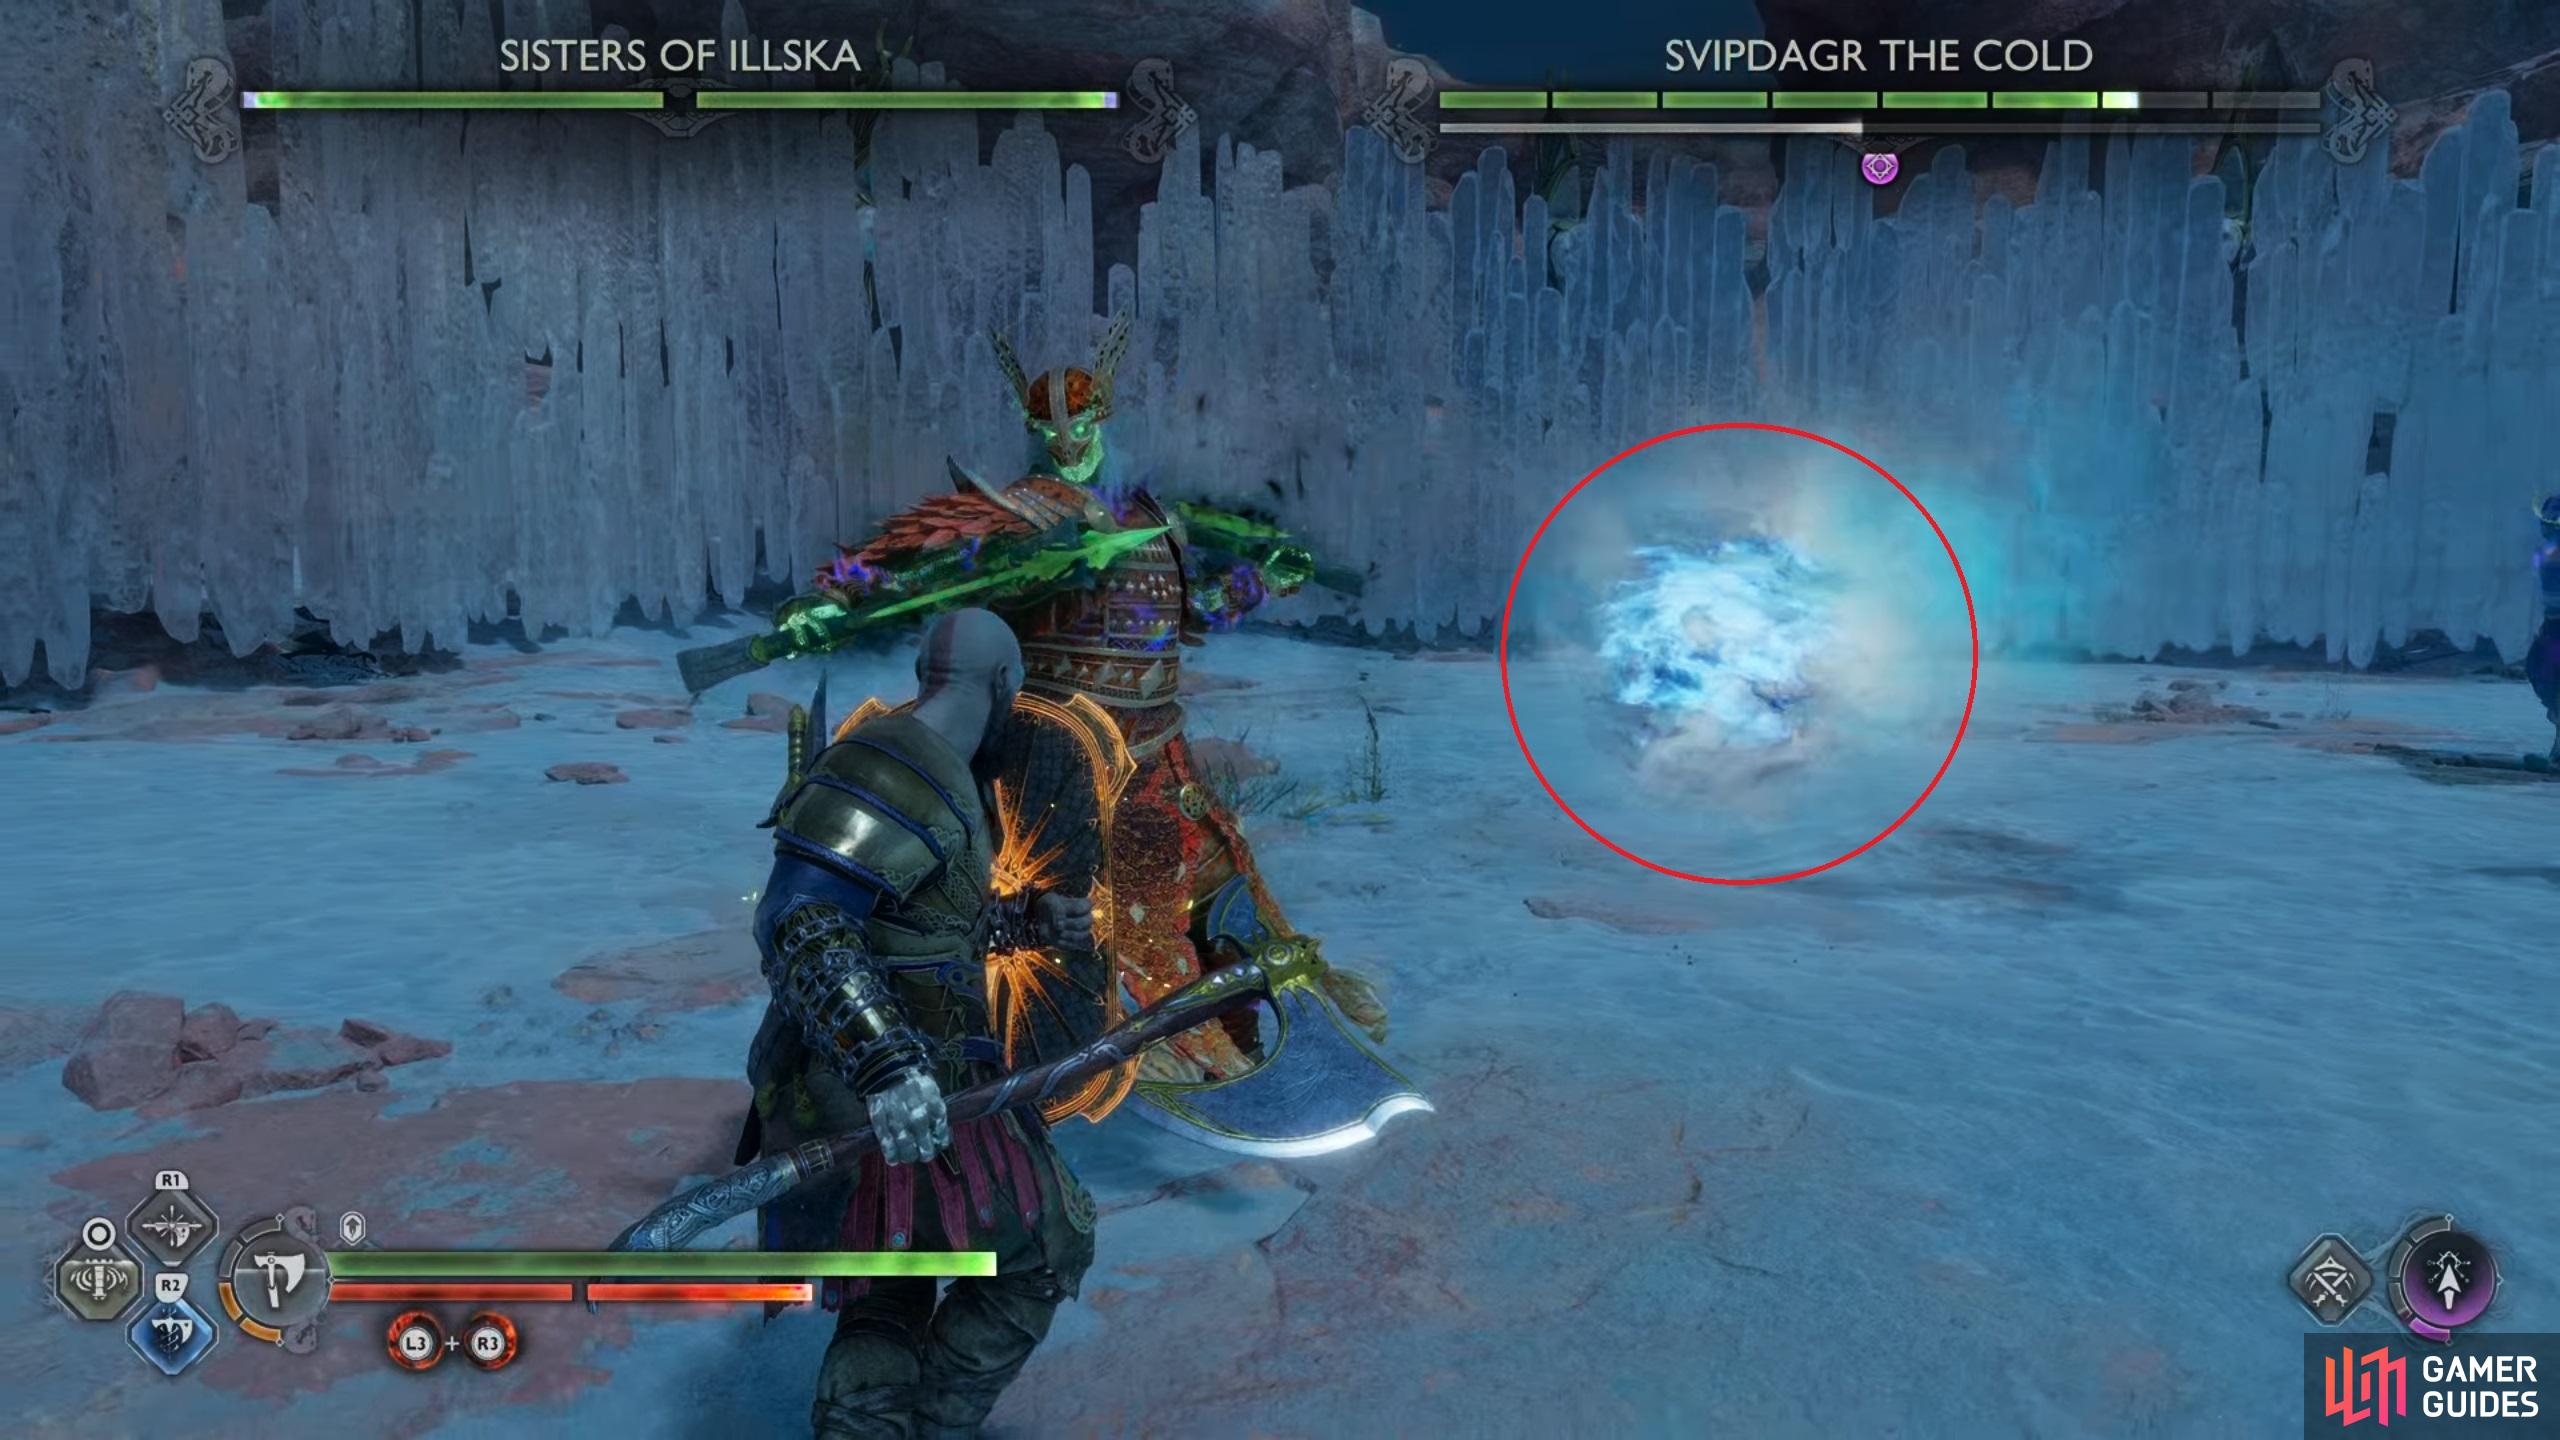 Destroy the light / frost orbs as quickly as possible with a ranged attack before they hit you.